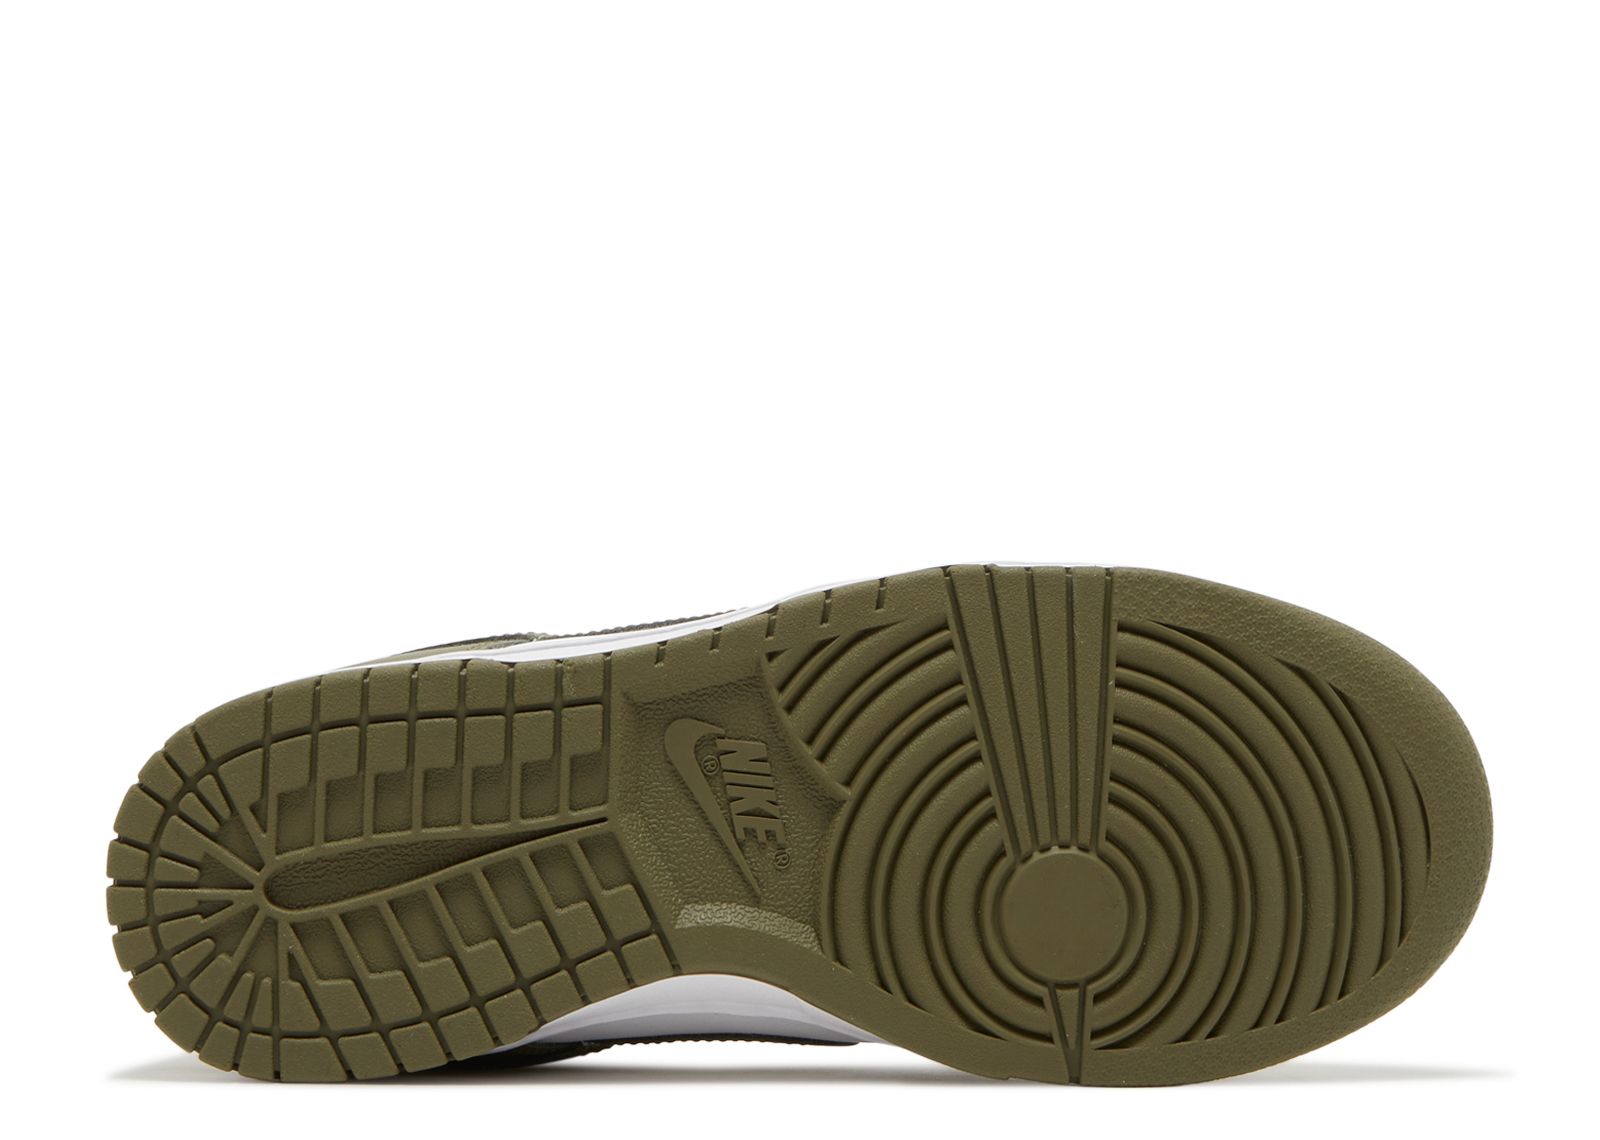 Olive Shades Take Over This Nike Dunk Low Remastered